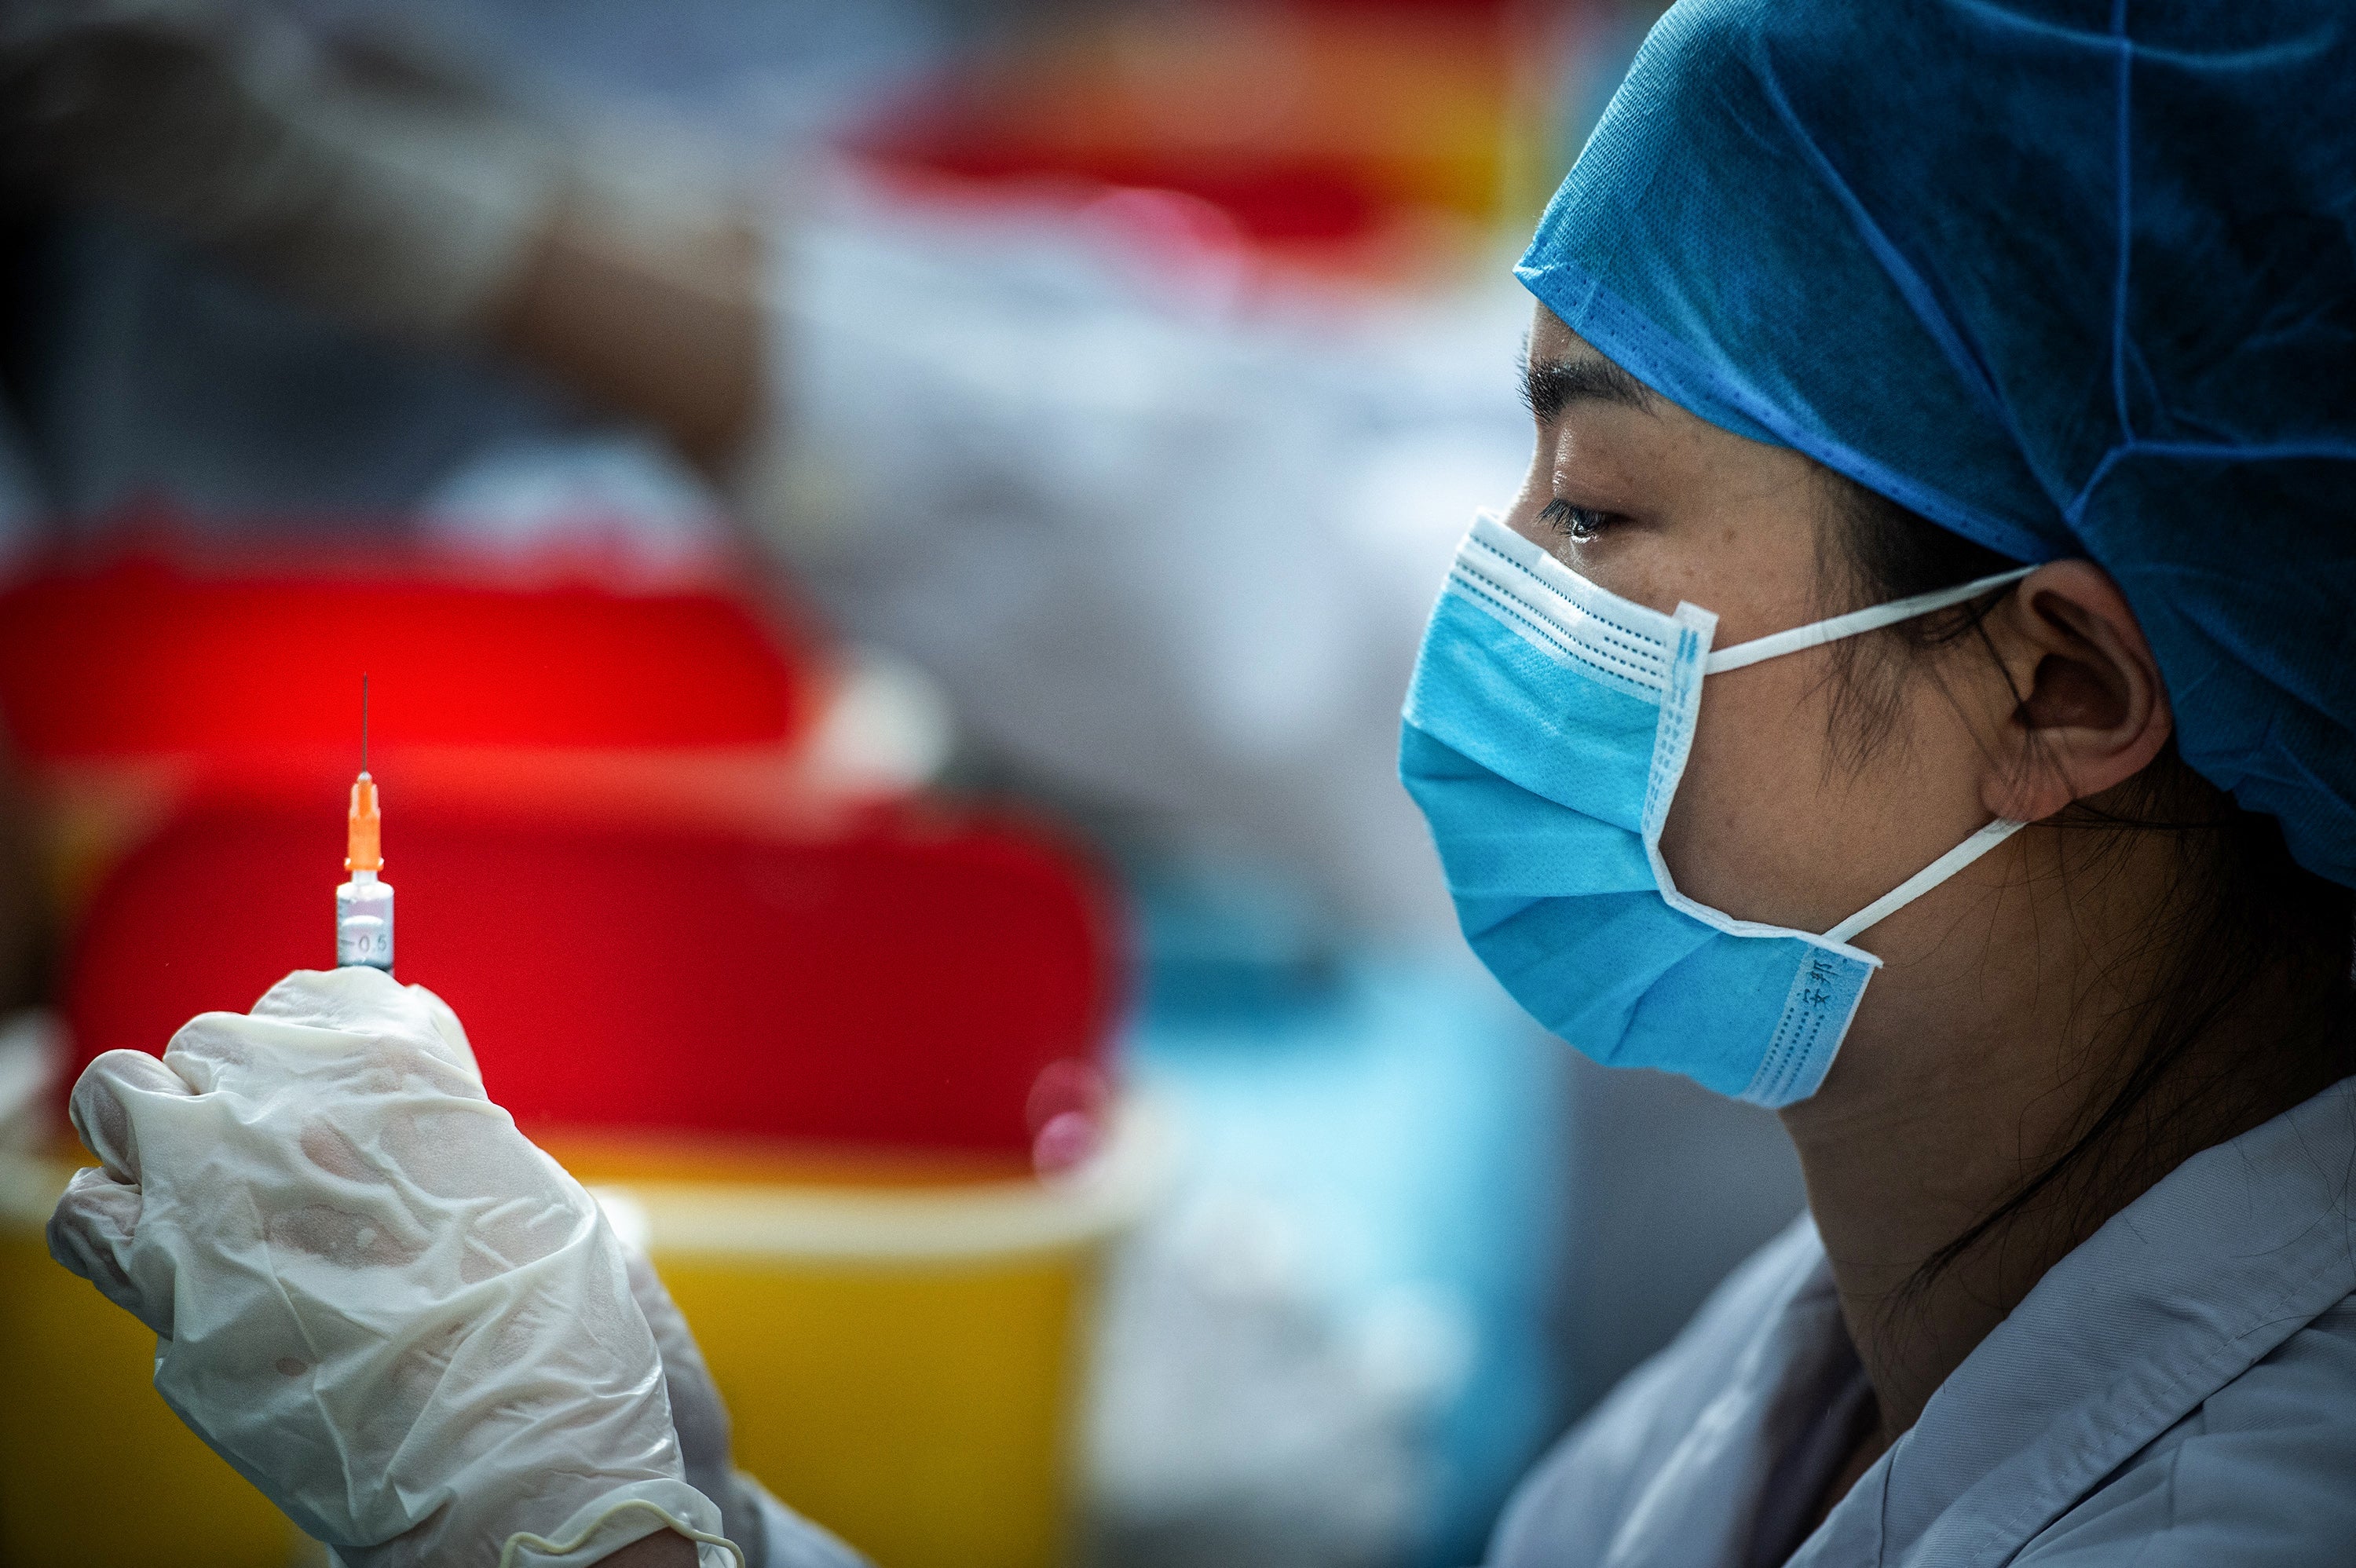 File Image: This photo taken on 28 April 2021 shows a medical staff member preparing a dose for a university student to get vaccinated against the Covid-19 coronavirus at a university in Wuhan, in China's central Hubei province